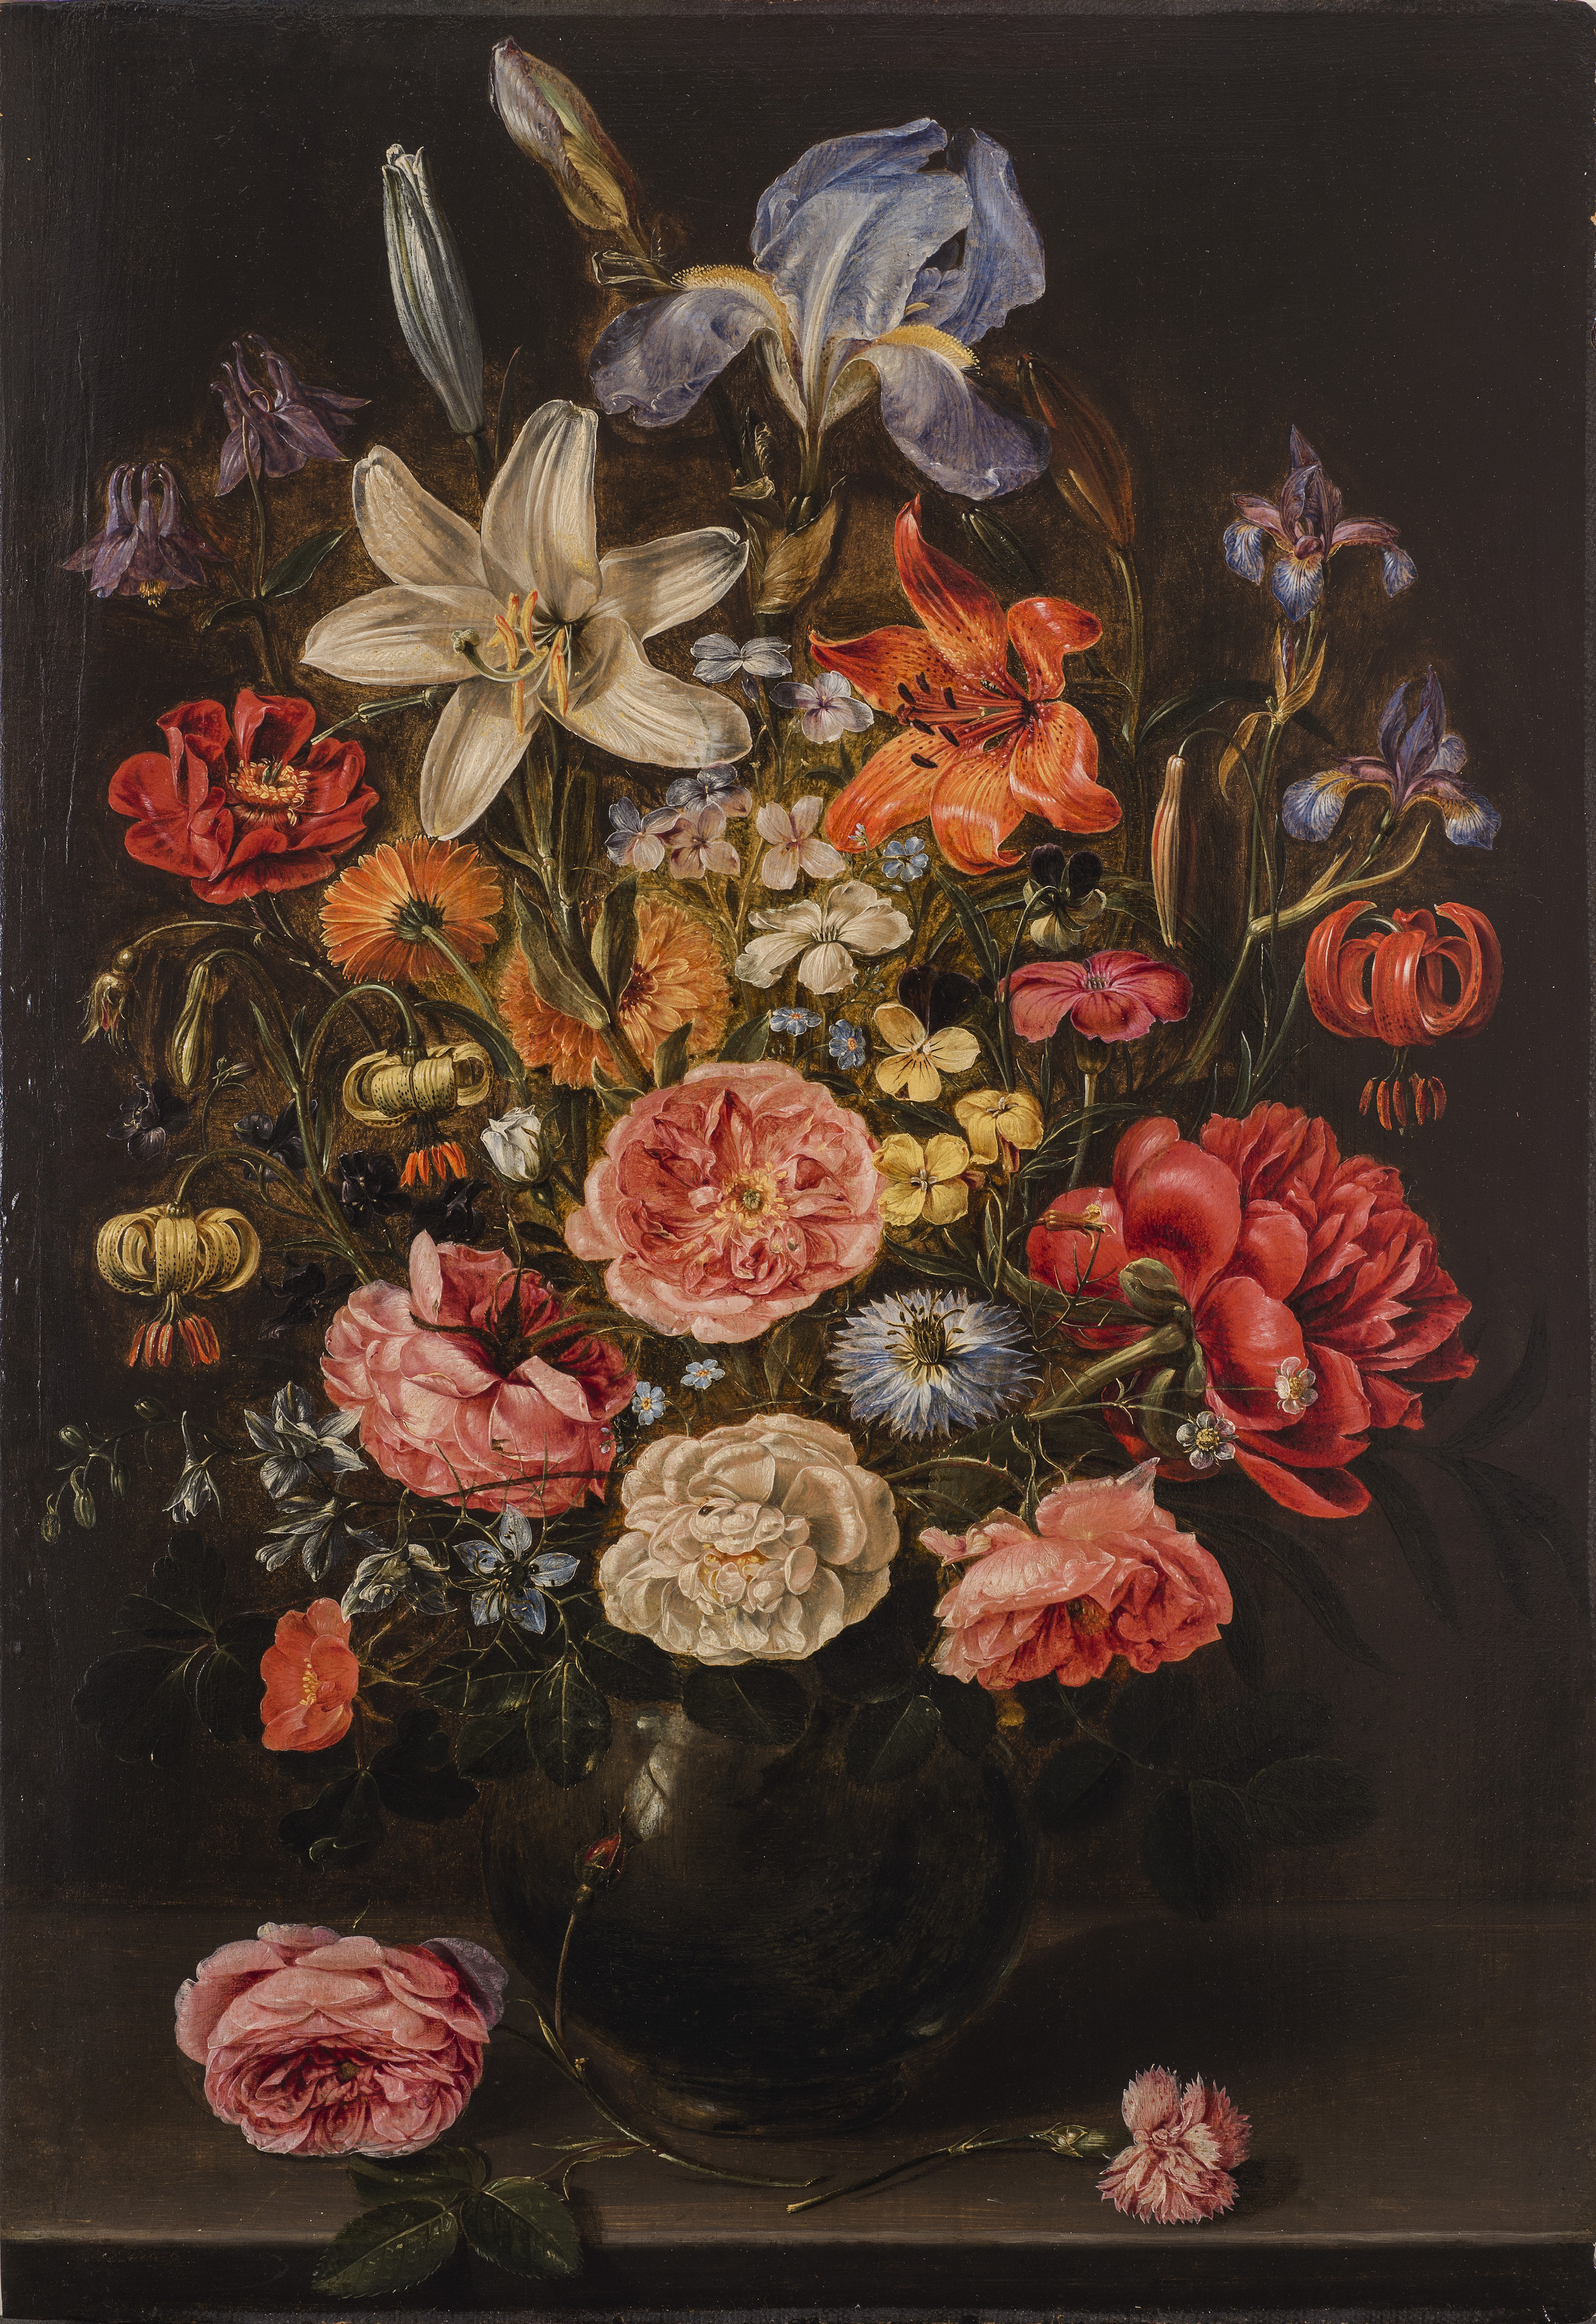 Realistic and detailed, the still life painting meticulously renders a variety of brightly colored flowers densely arranged in a dark round vase set against a dark background. The vase sits upon a stone ledge with two stray pink roses laying in the foreground.